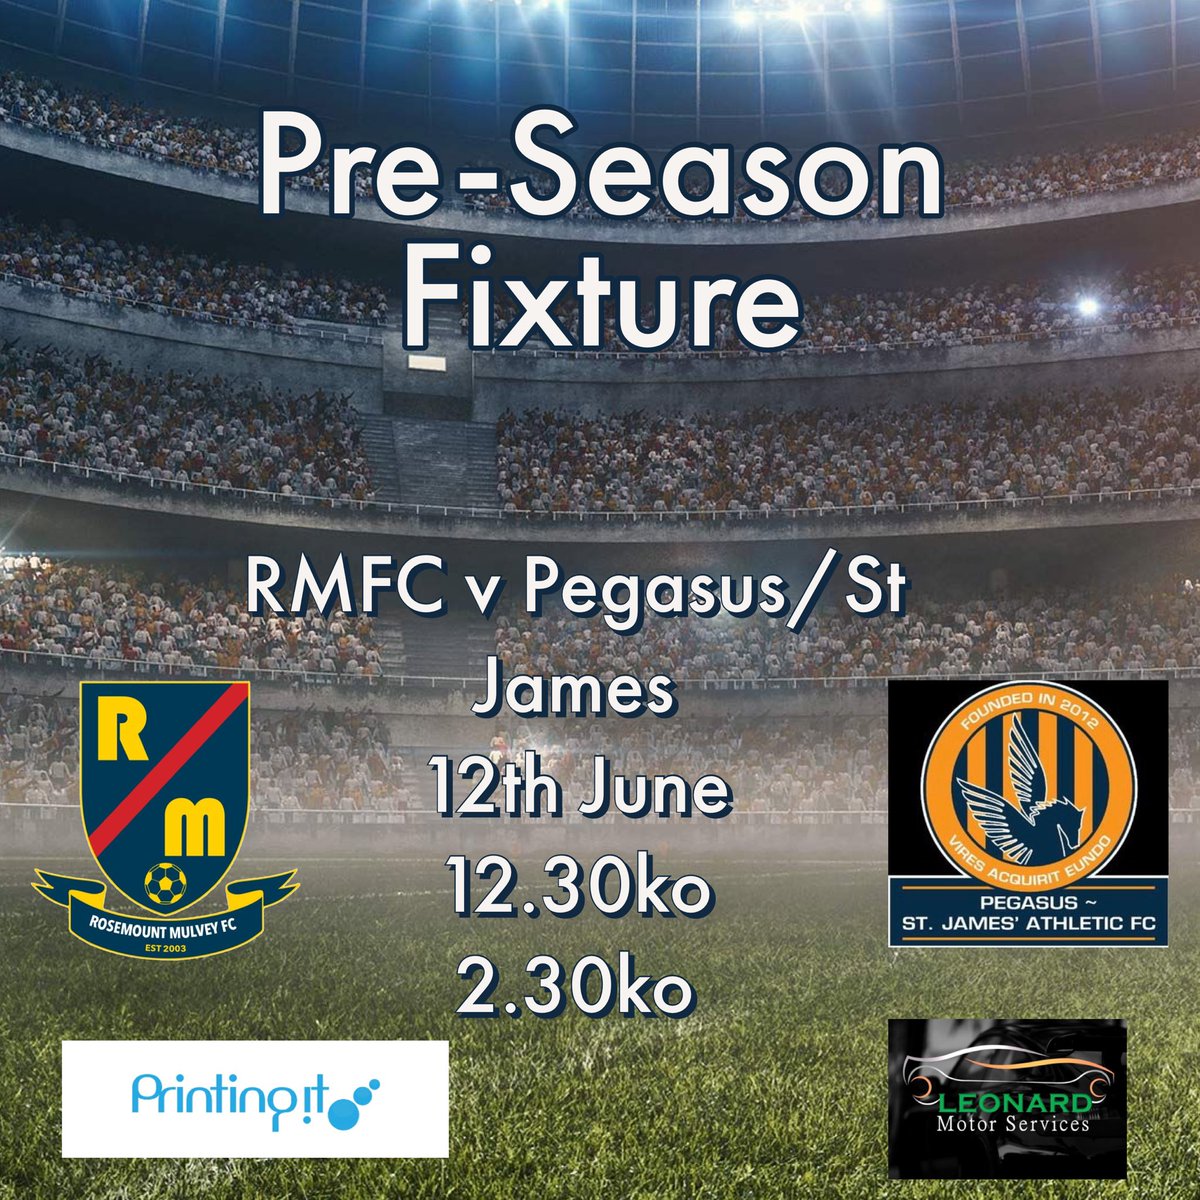 Rosemountmulvey Fc We Are Delighted To Be Able To Announce That This Saturday Our Senior Men S Team Return To Action With Both Teams Playing Pegasus St James In Rosemount With The 1st